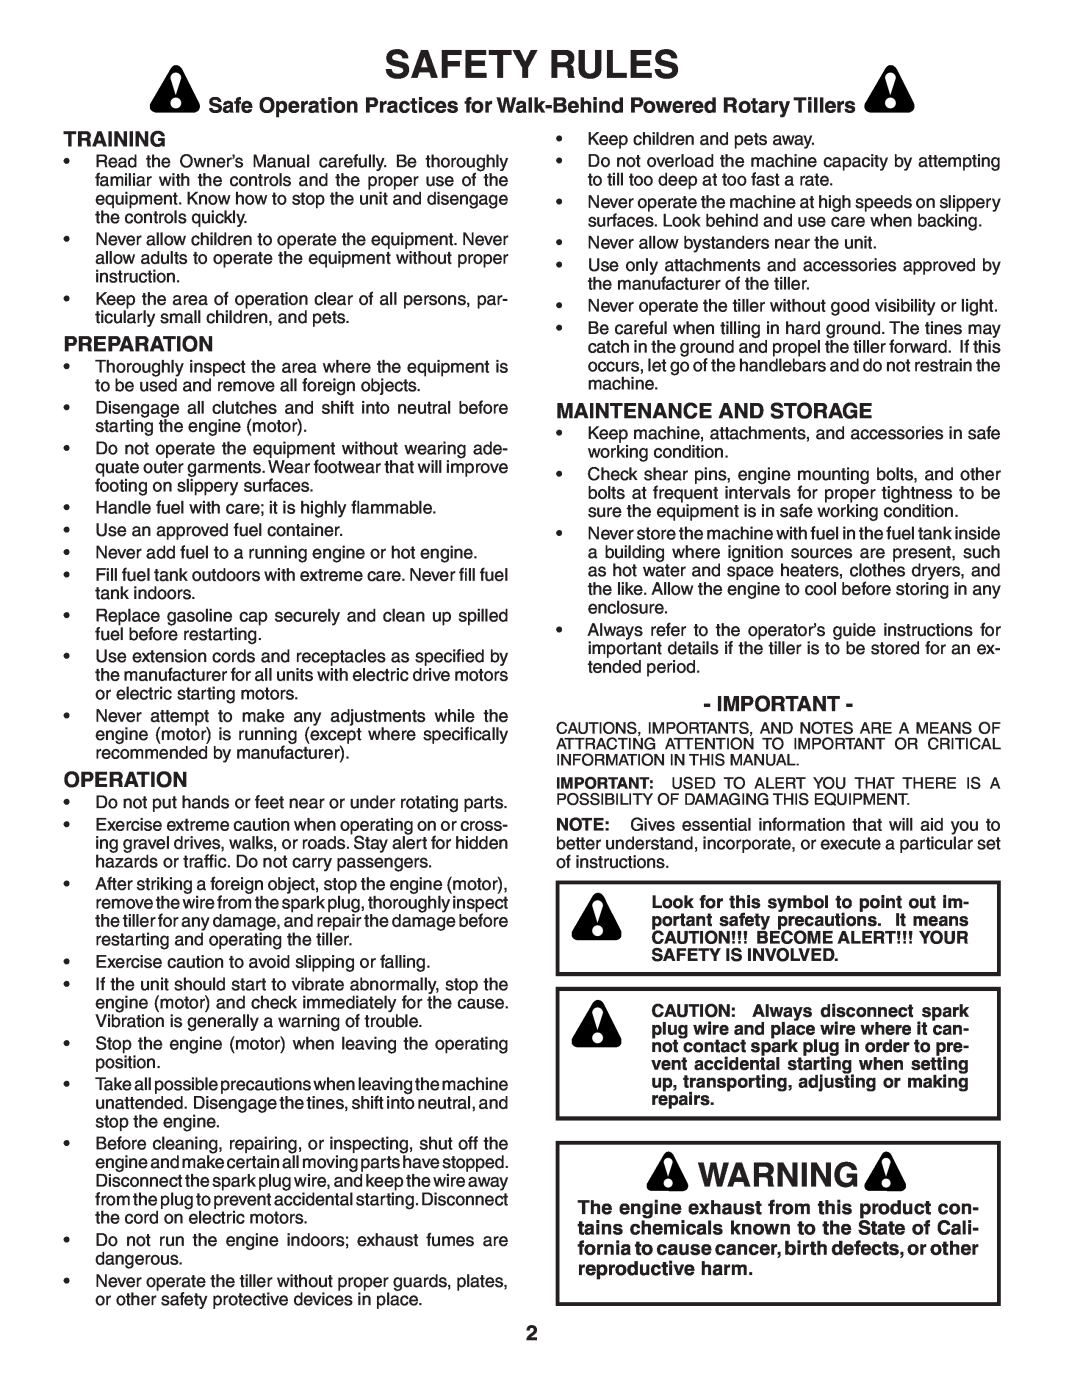 Poulan HDF550 manual Safety Rules, Training, Preparation, Operation, Maintenance And Storage 